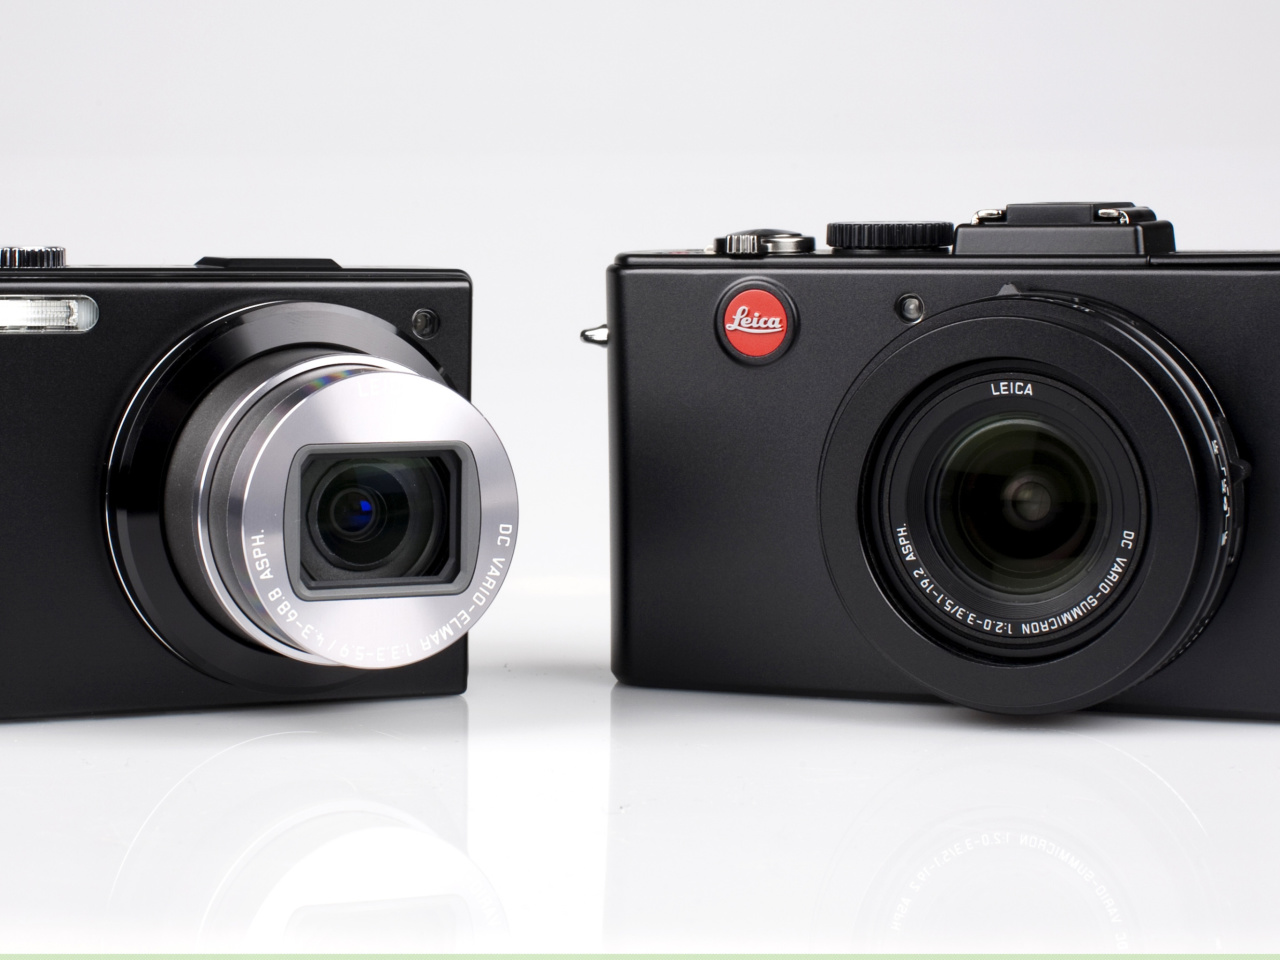 Leica D Lux 5 and Leica V LUX 1 screenshot #1 1280x960